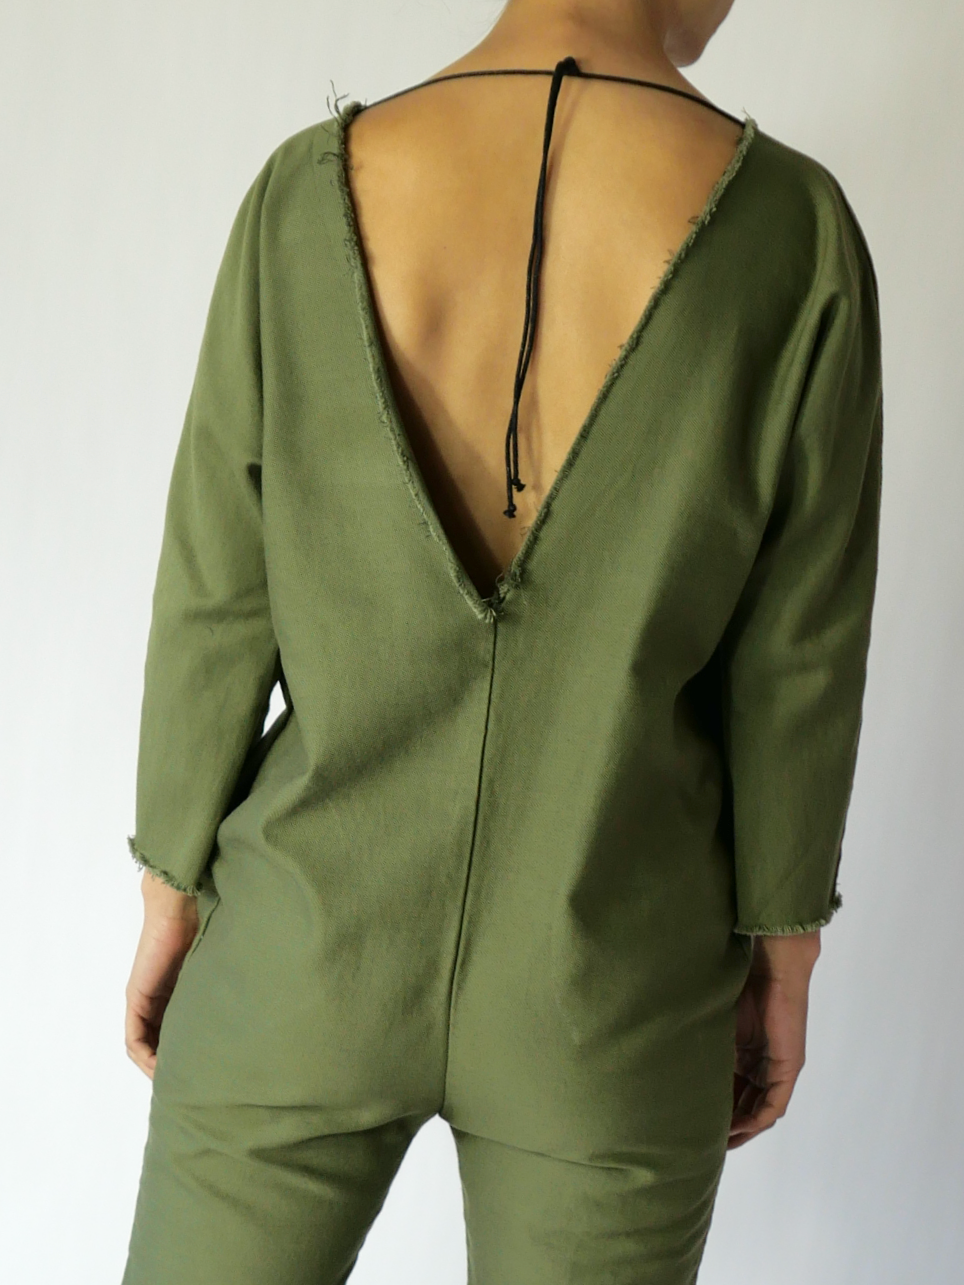 ANGL COVERALL in pine